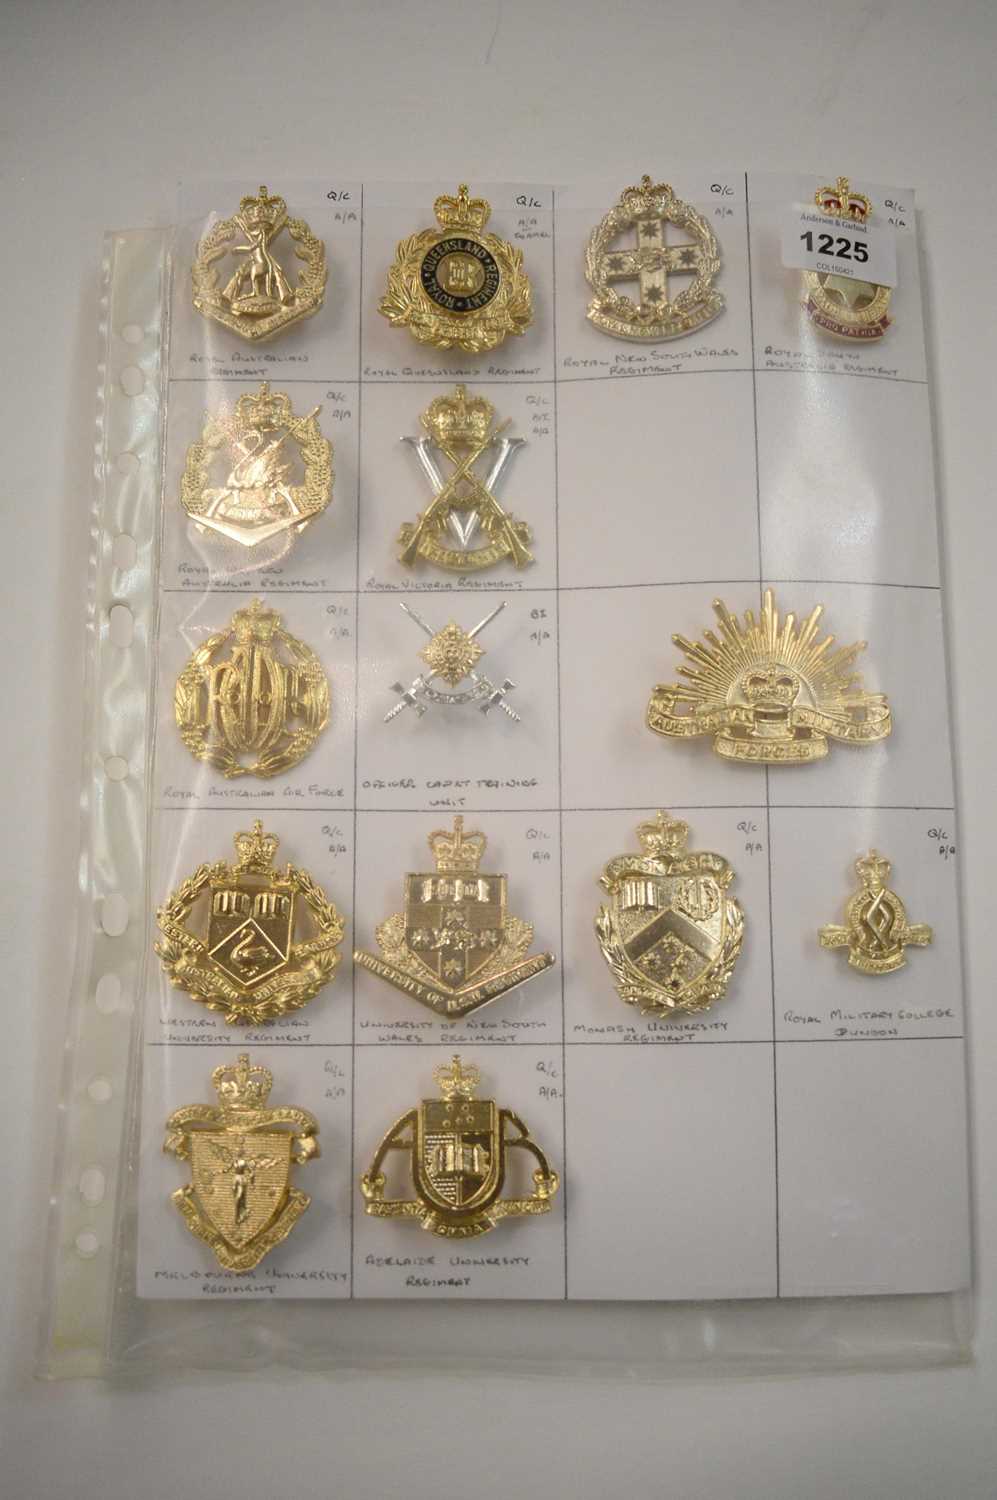 Lot 1225 - A collection of 15 Australian Military cap badges.